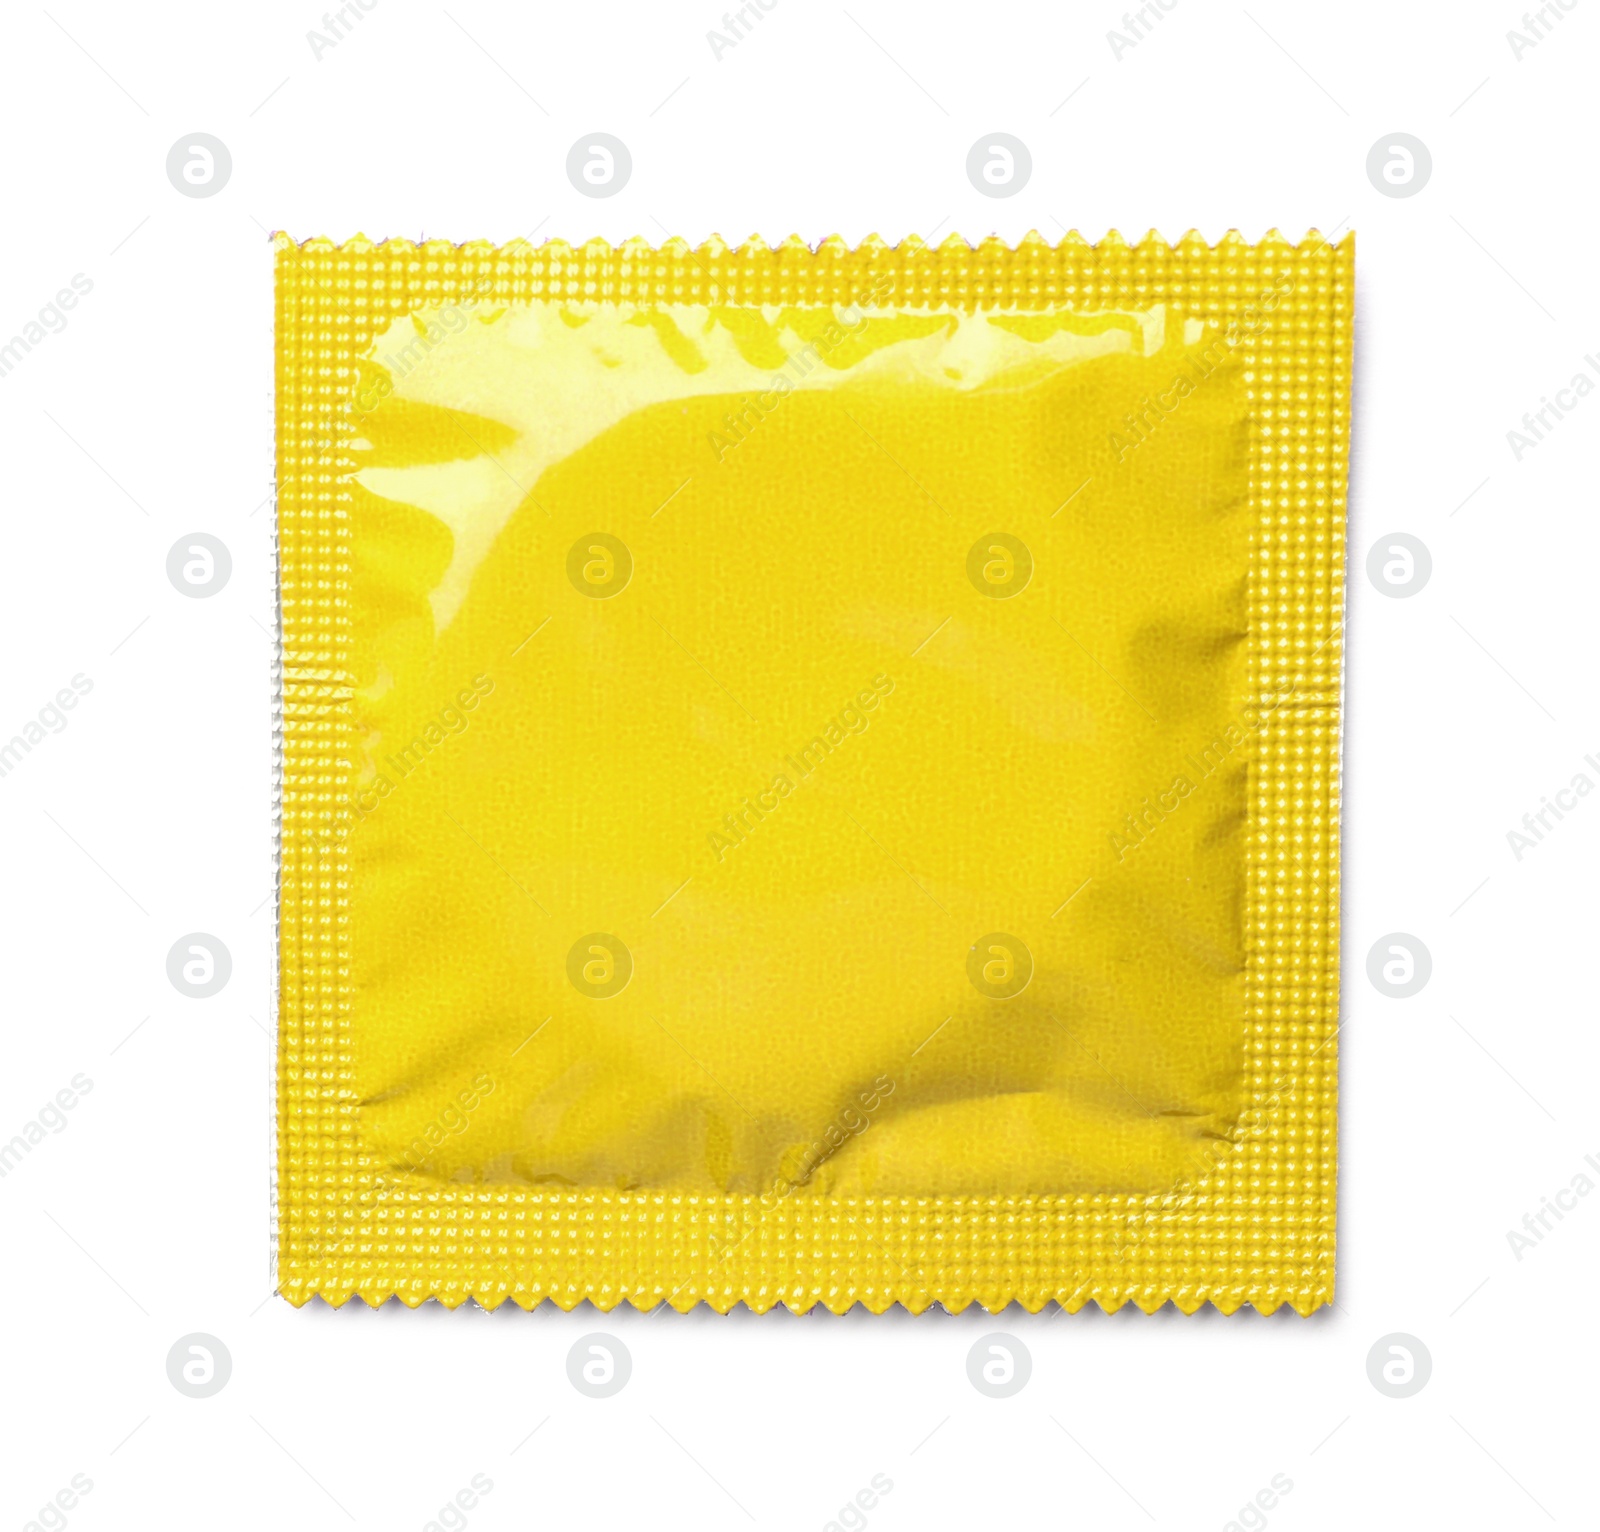 Image of Yellow condom package on white background, top view. Safe sex